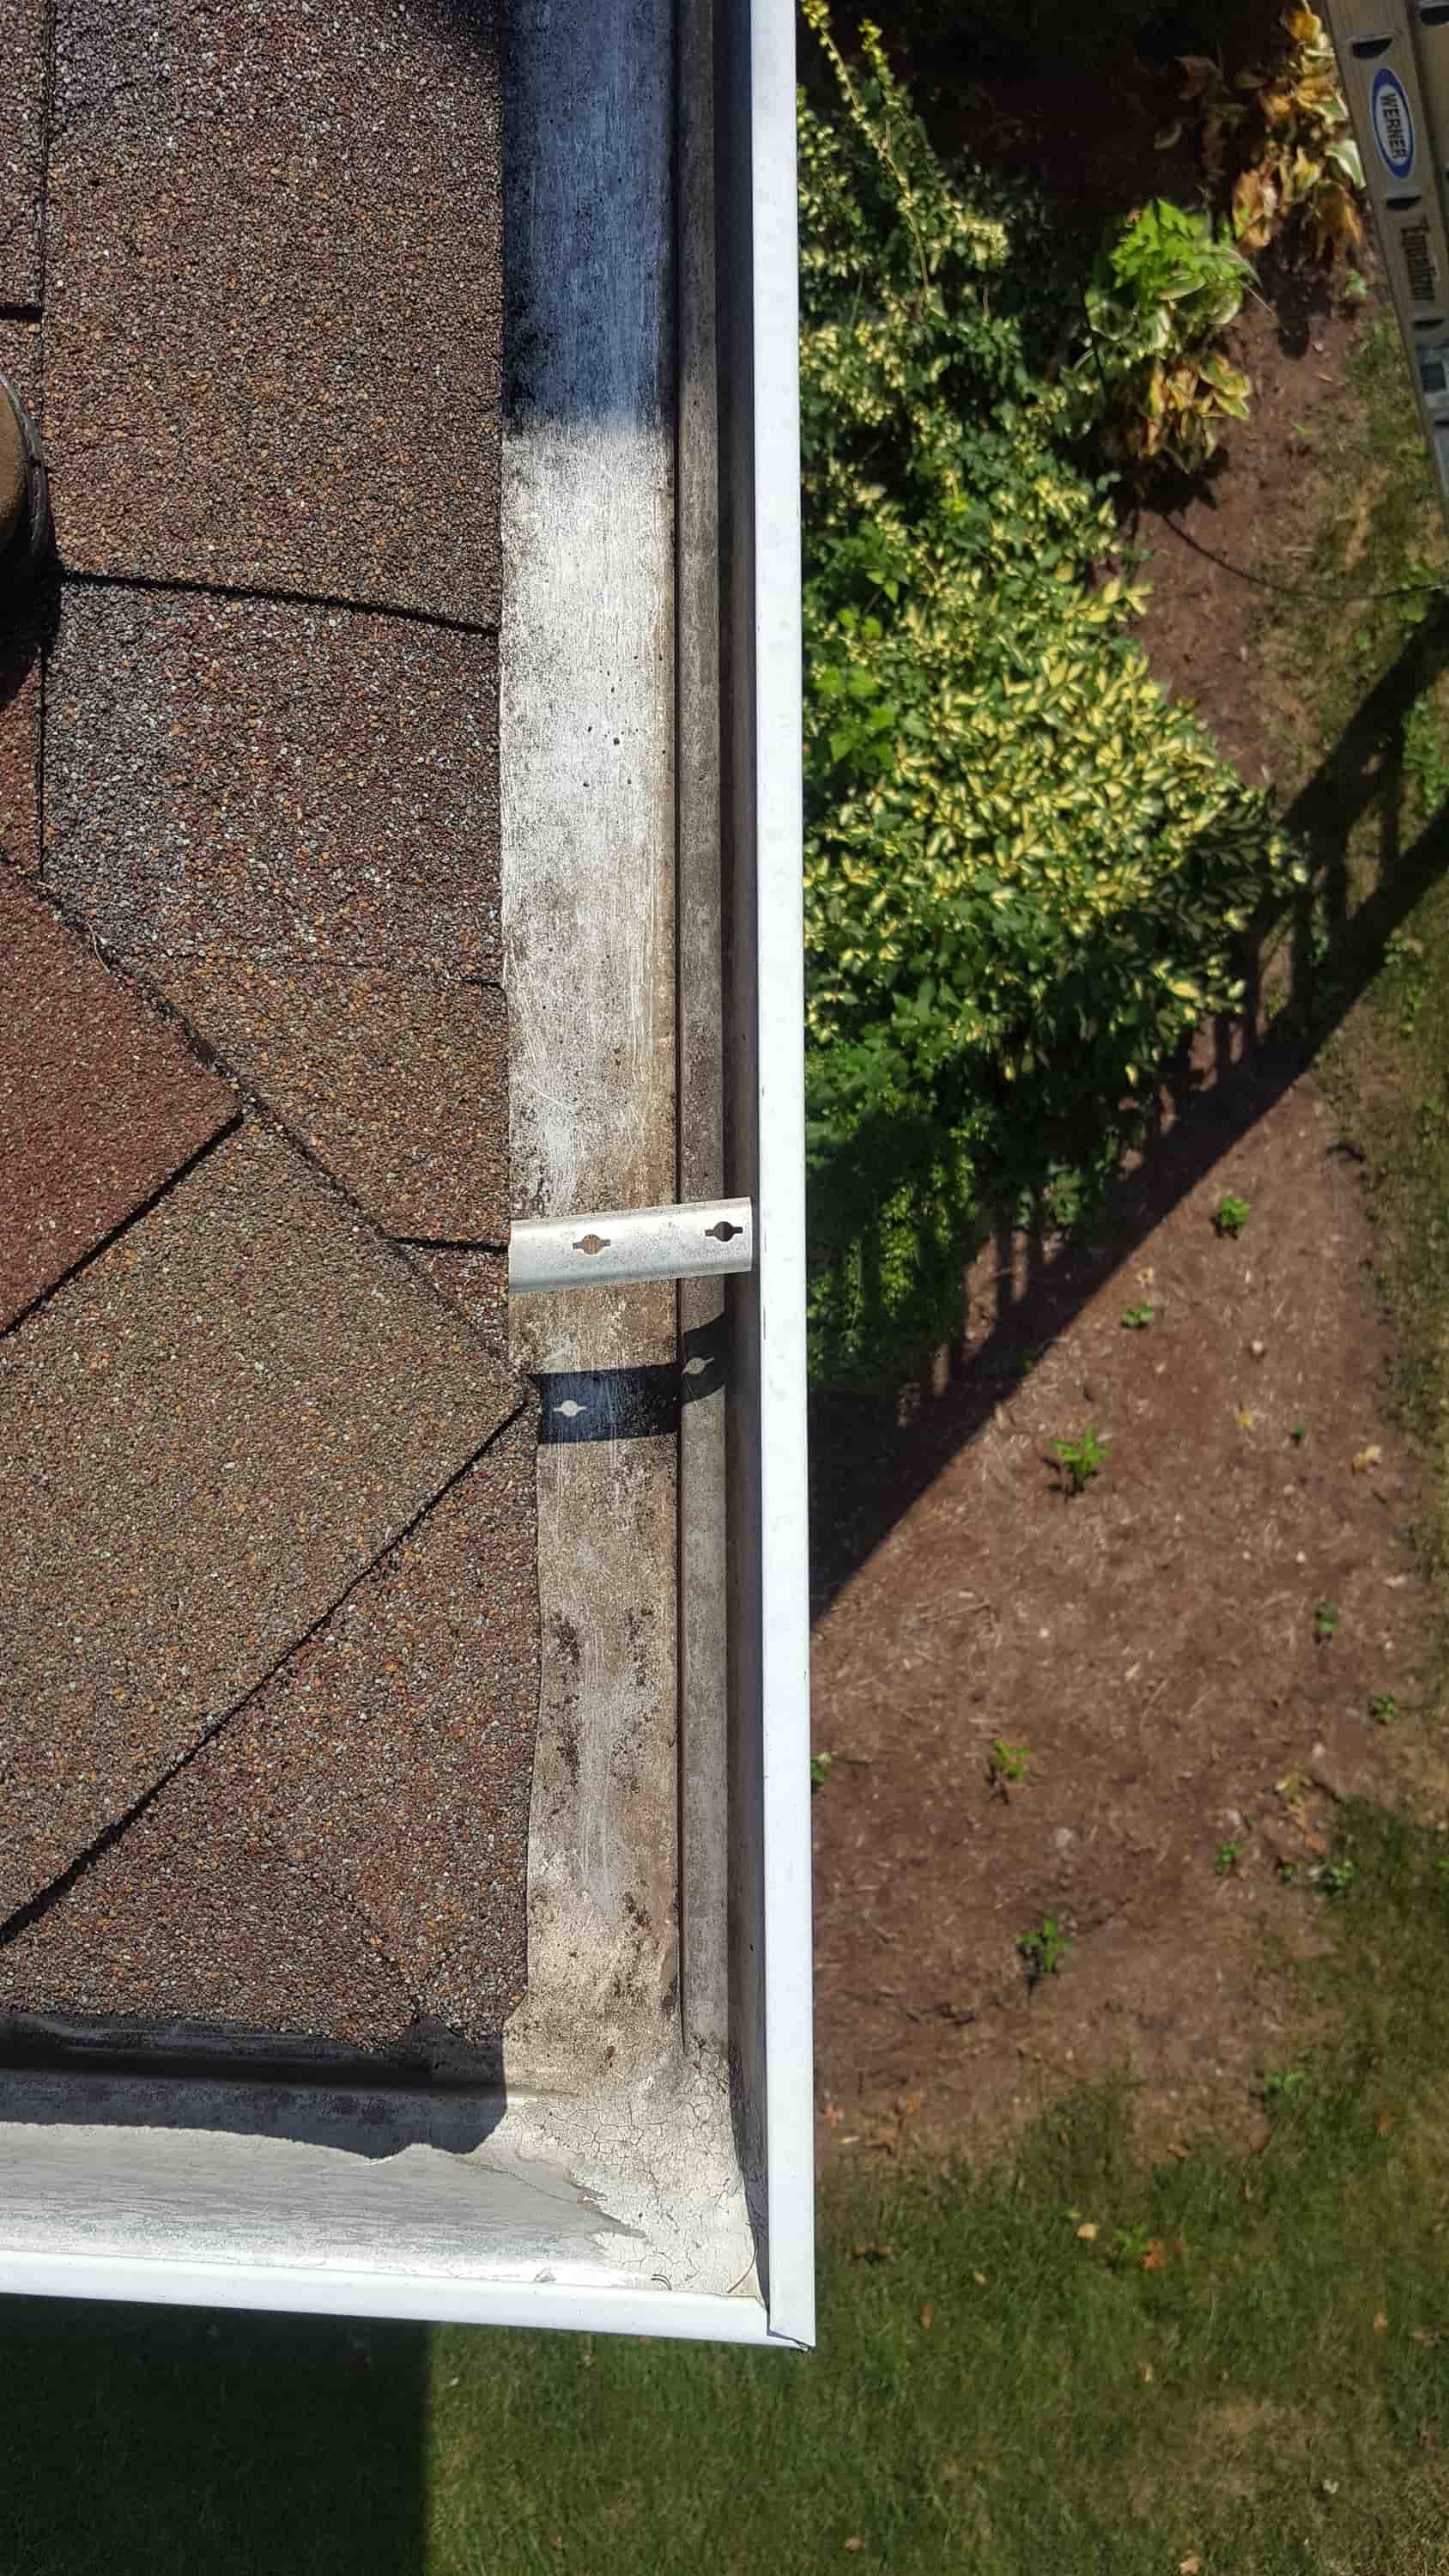 cleaning eavestroughs cost